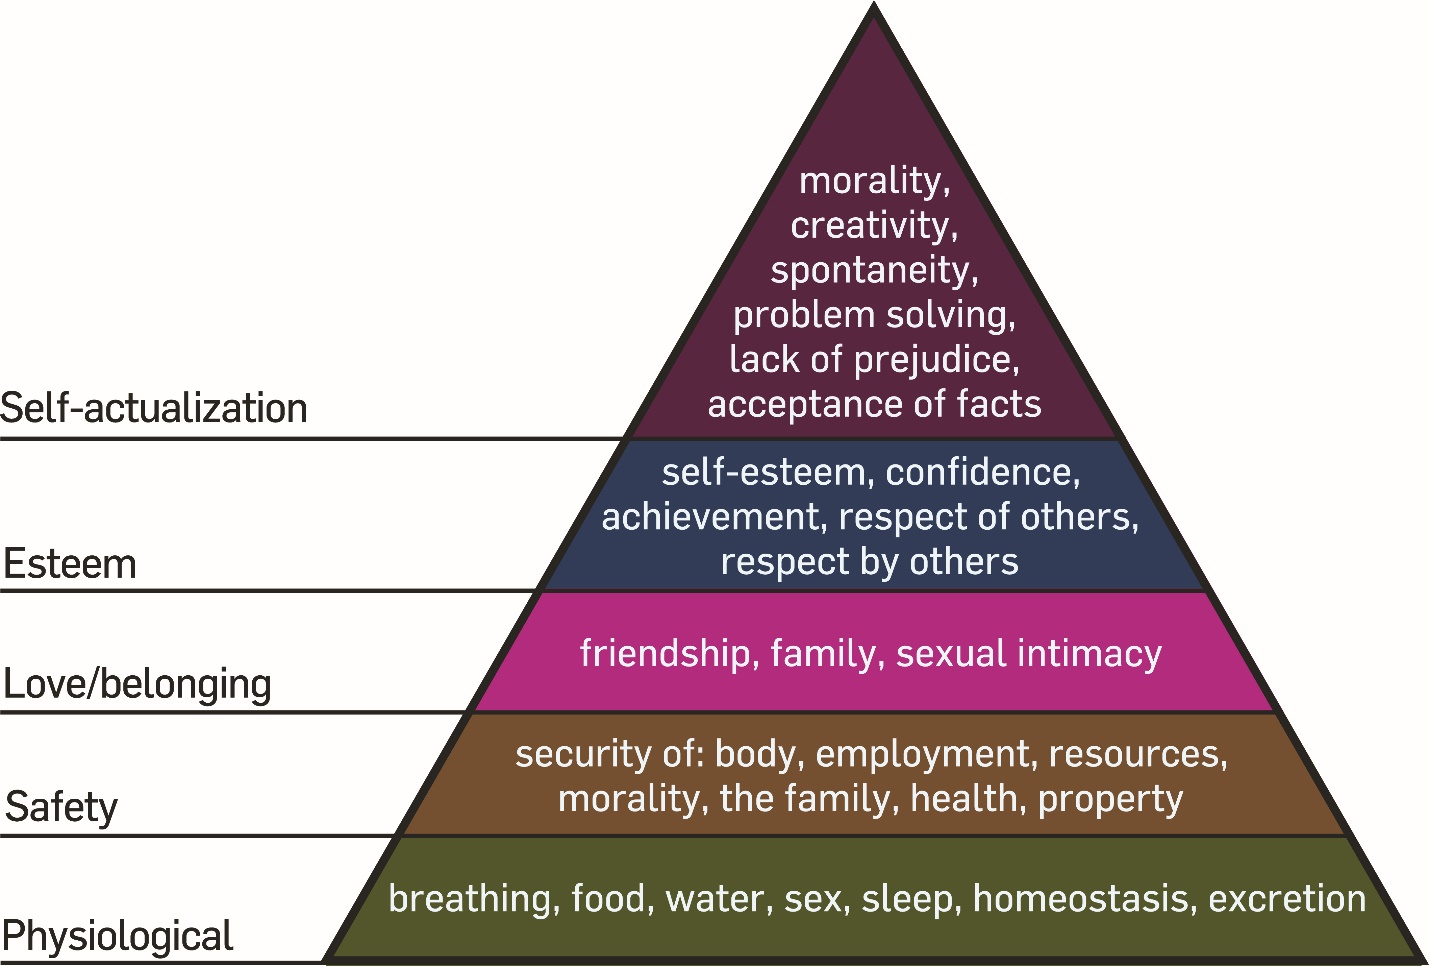 Maslow's hierarchy showing Physiological at the base of a pyramid, followed by safety, love/belonging, esteem, and self-actualization.